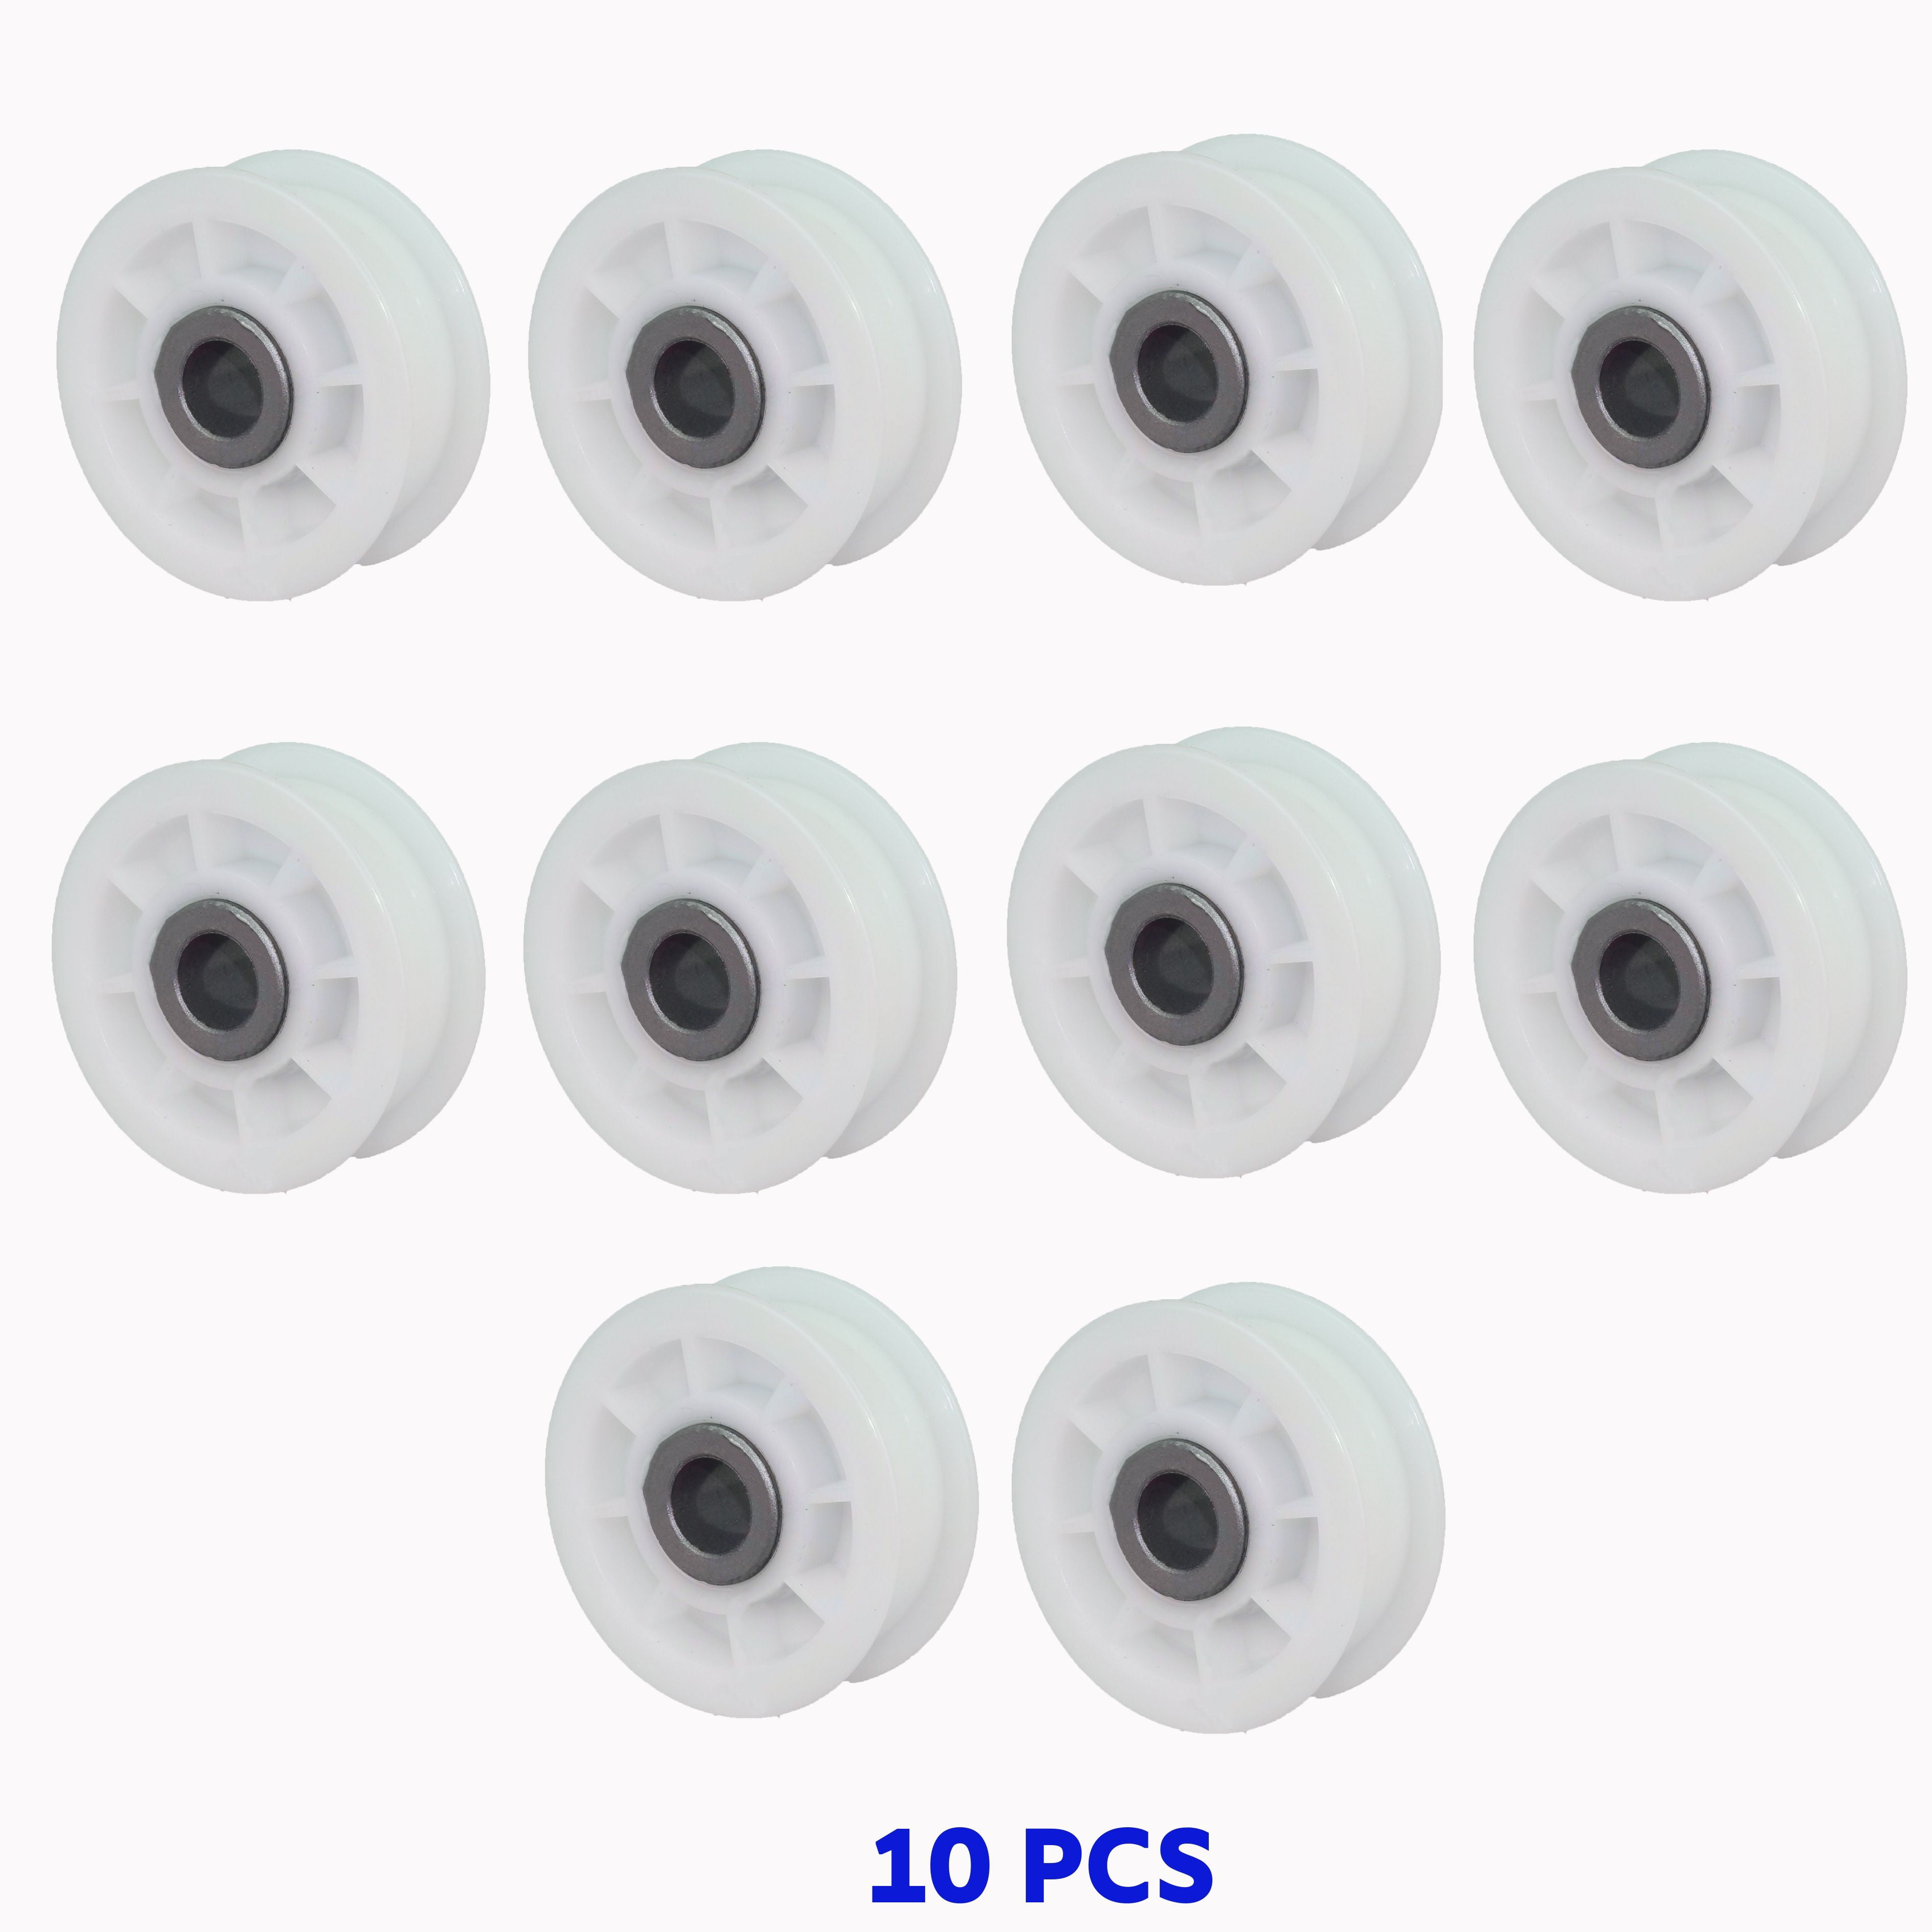 10pcs For 4560EL3001A LG Dryer Idler Pulley Wheel & Bearing Also Fits Kenmore 